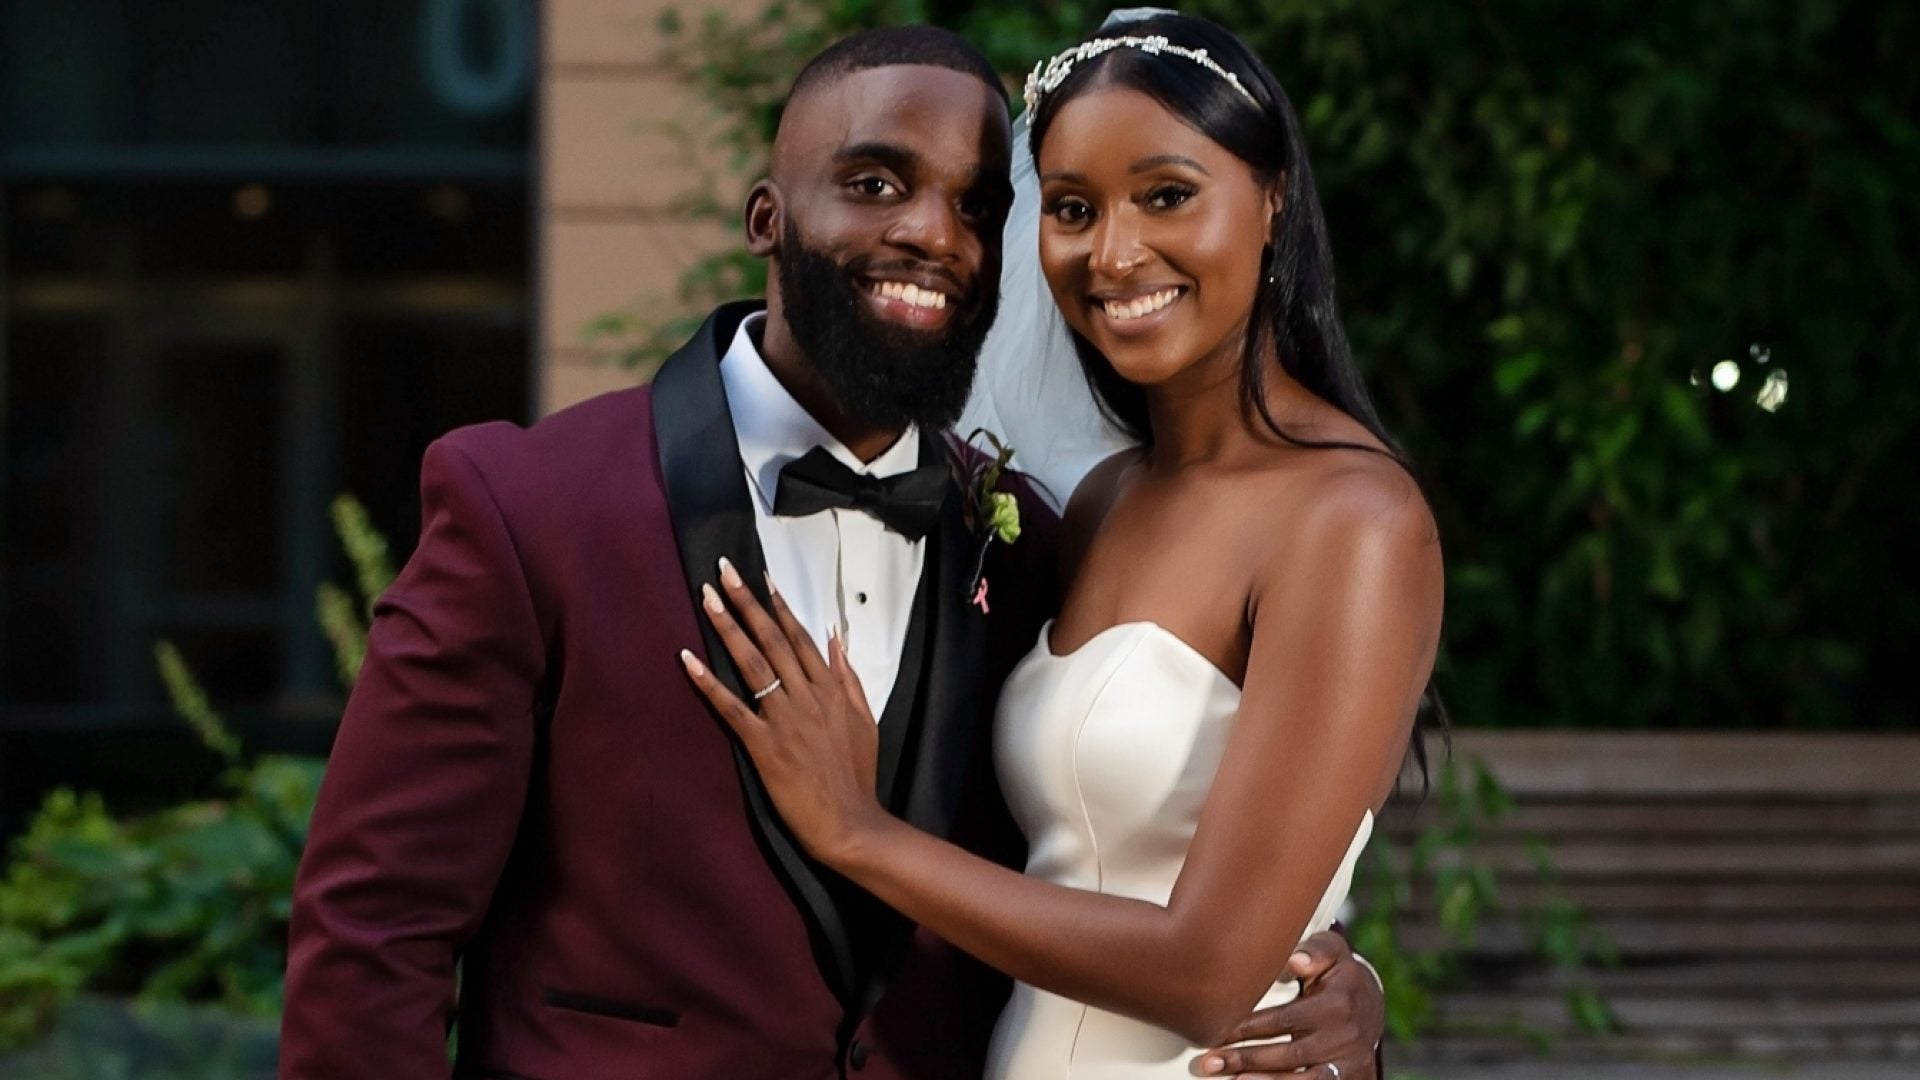 'A Sign From God' Motivated Jasmina To Get 'Married At First Sight'